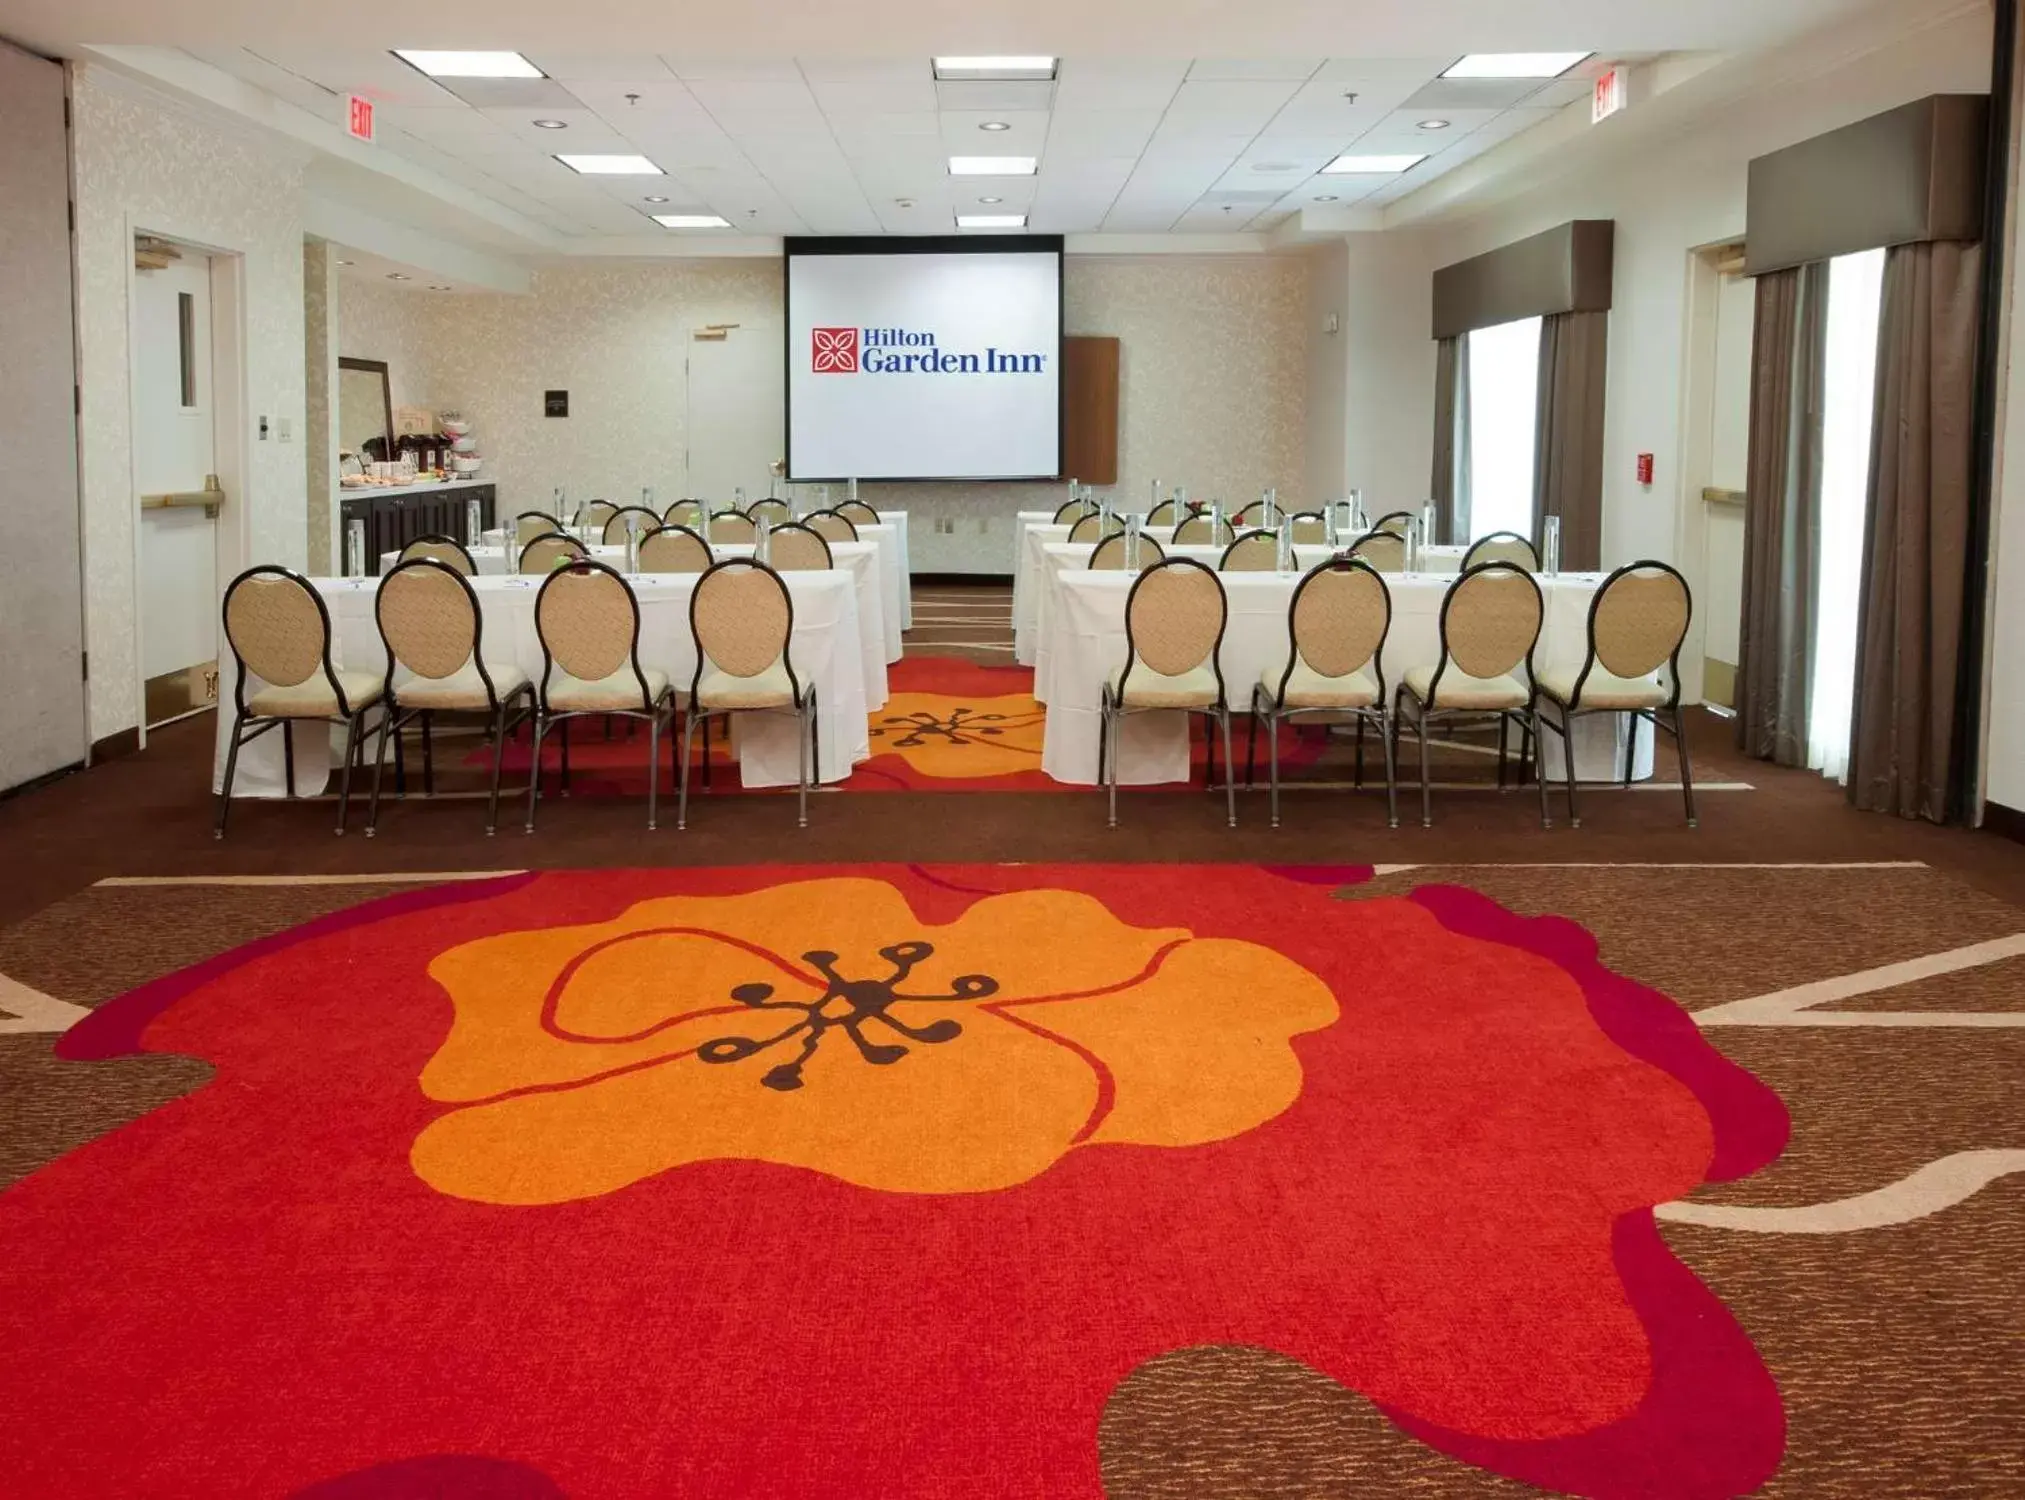 Meeting/conference room, Banquet Facilities in Hilton Garden Inn Fort Worth/Fossil Creek